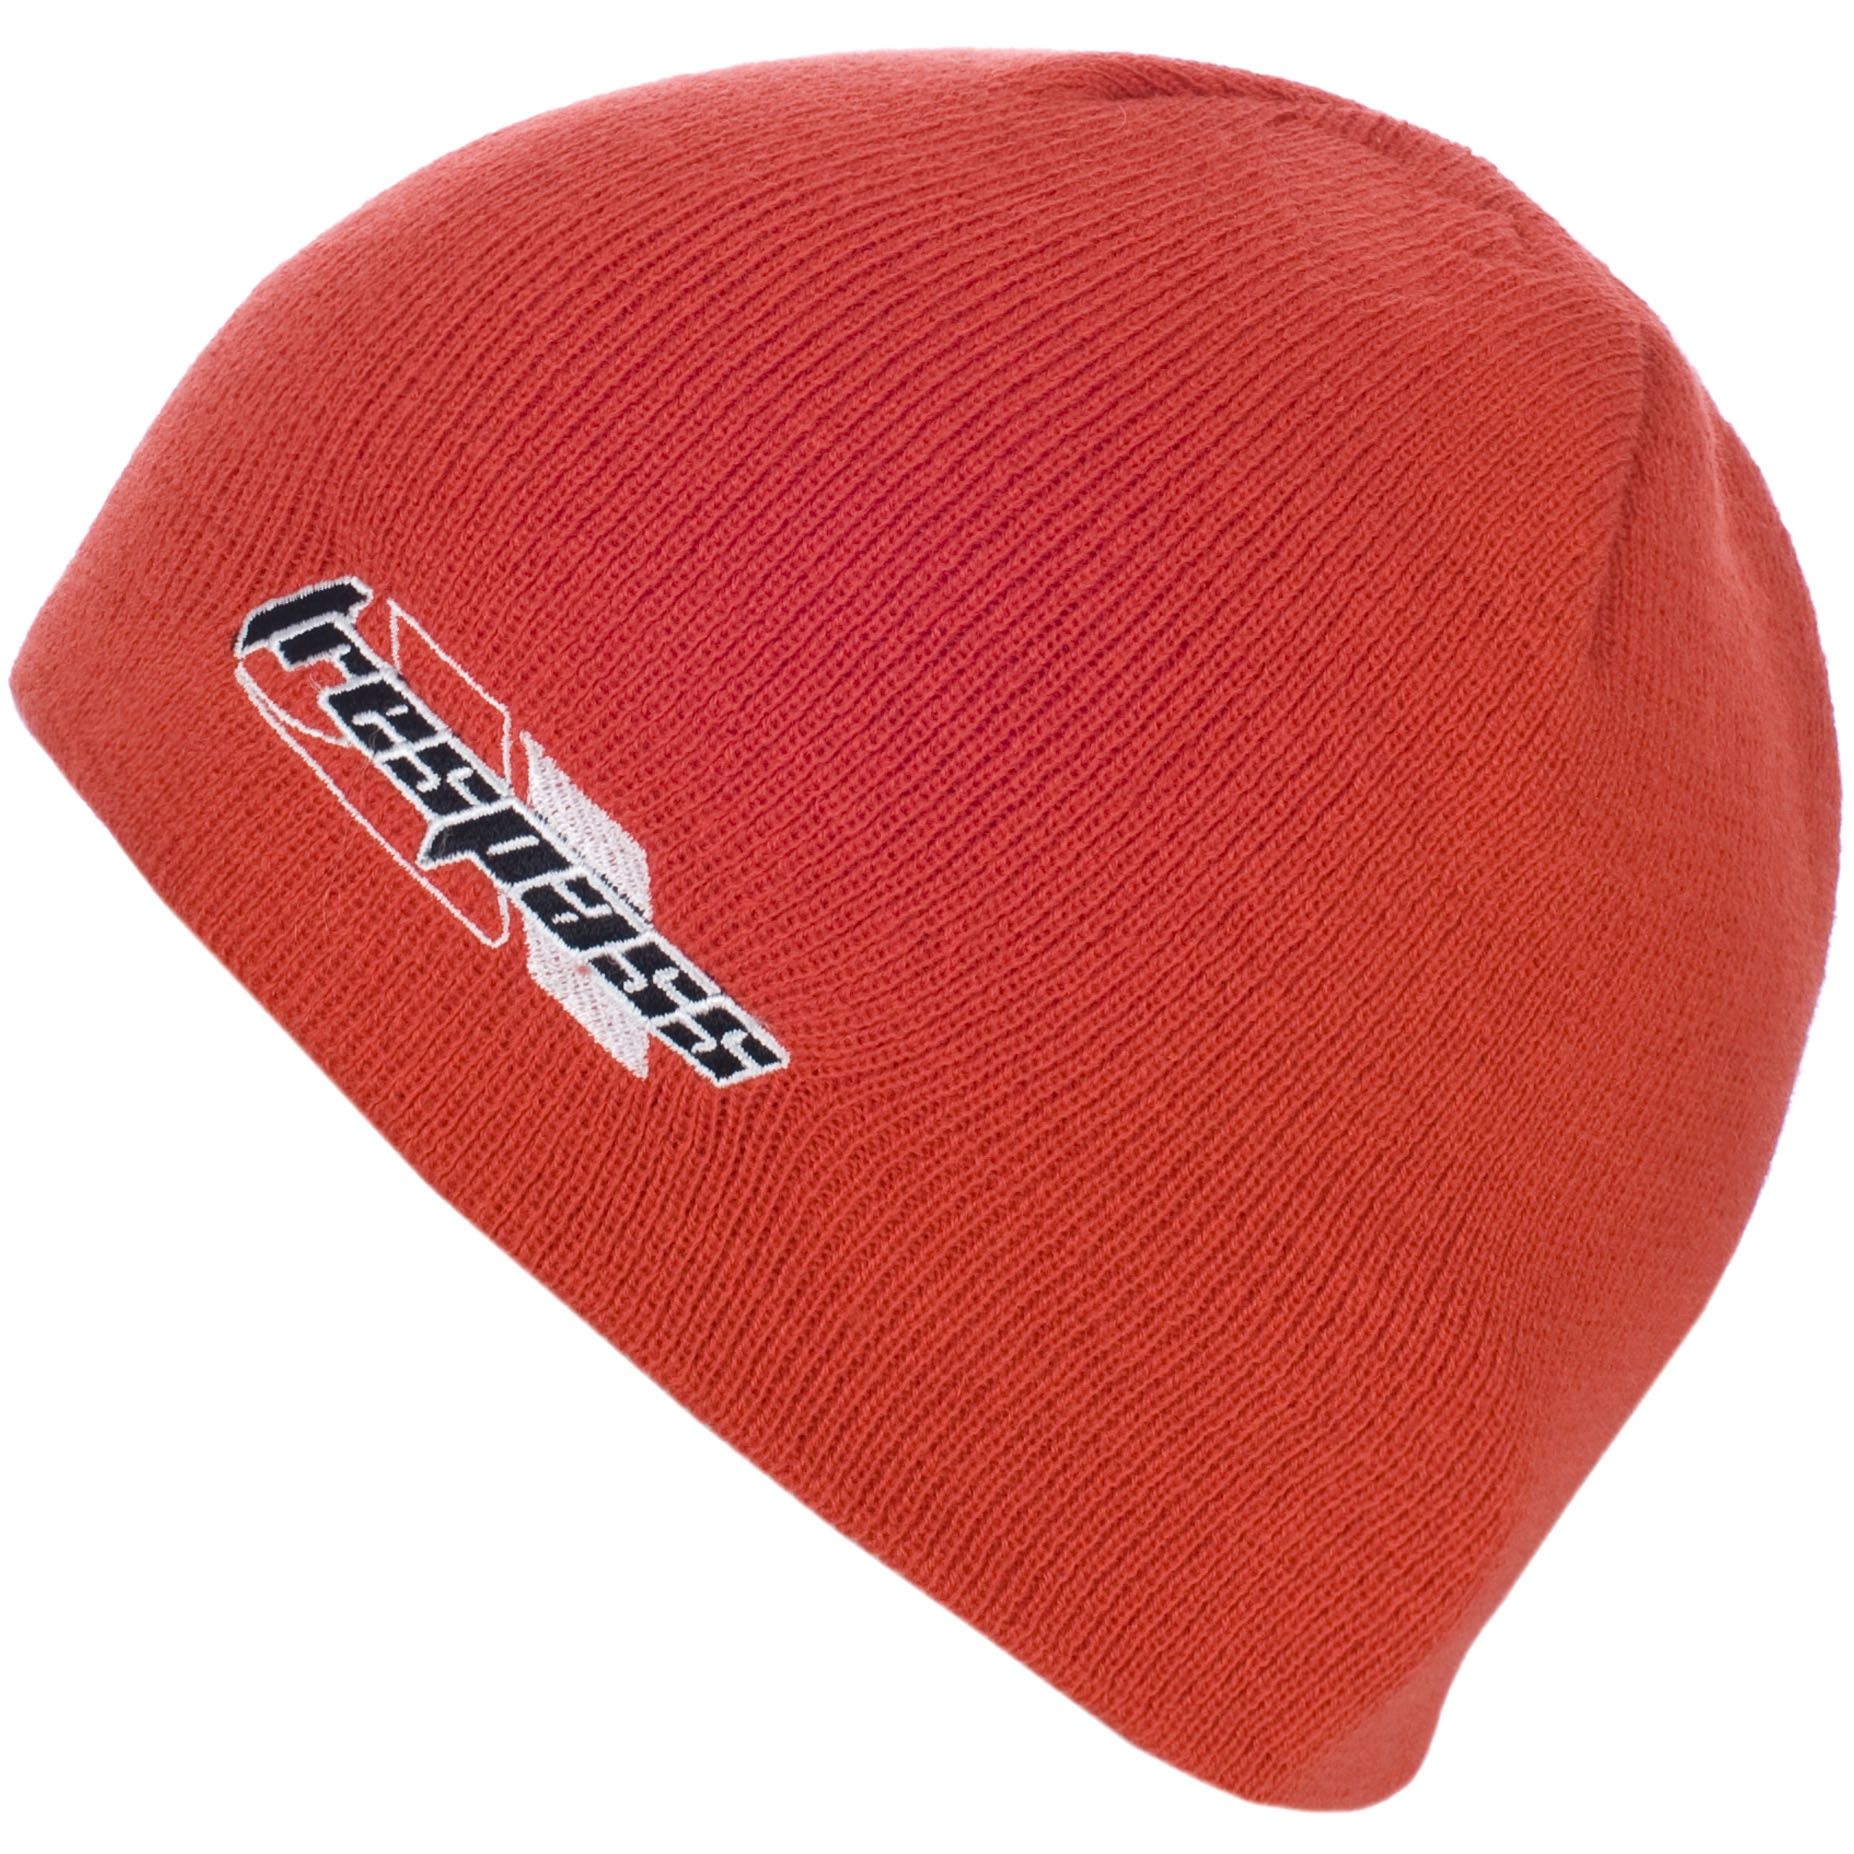 Boys knitted hat with embroidered logo. Shell: 100% Acrylic. Lining: Double Walled.